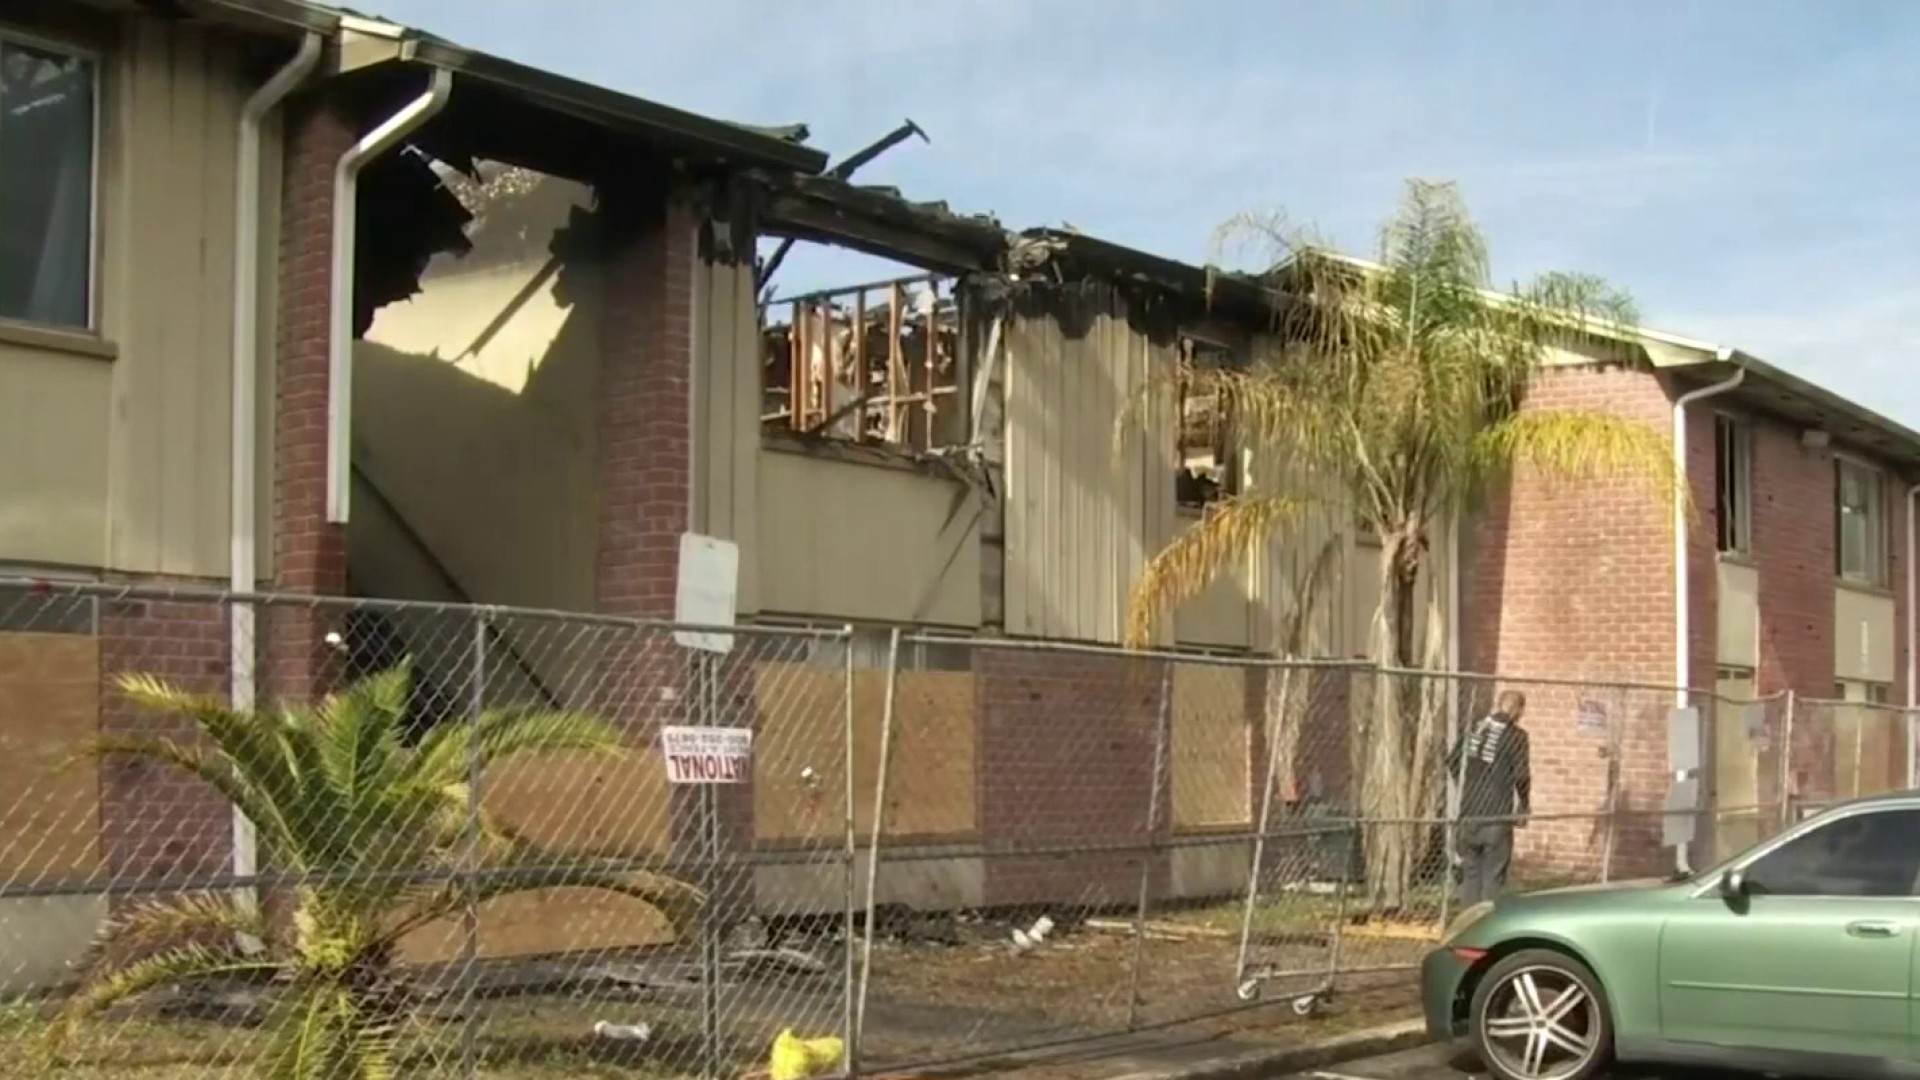 We have nowhere to go:' Fire at Pine Hills apartment complex